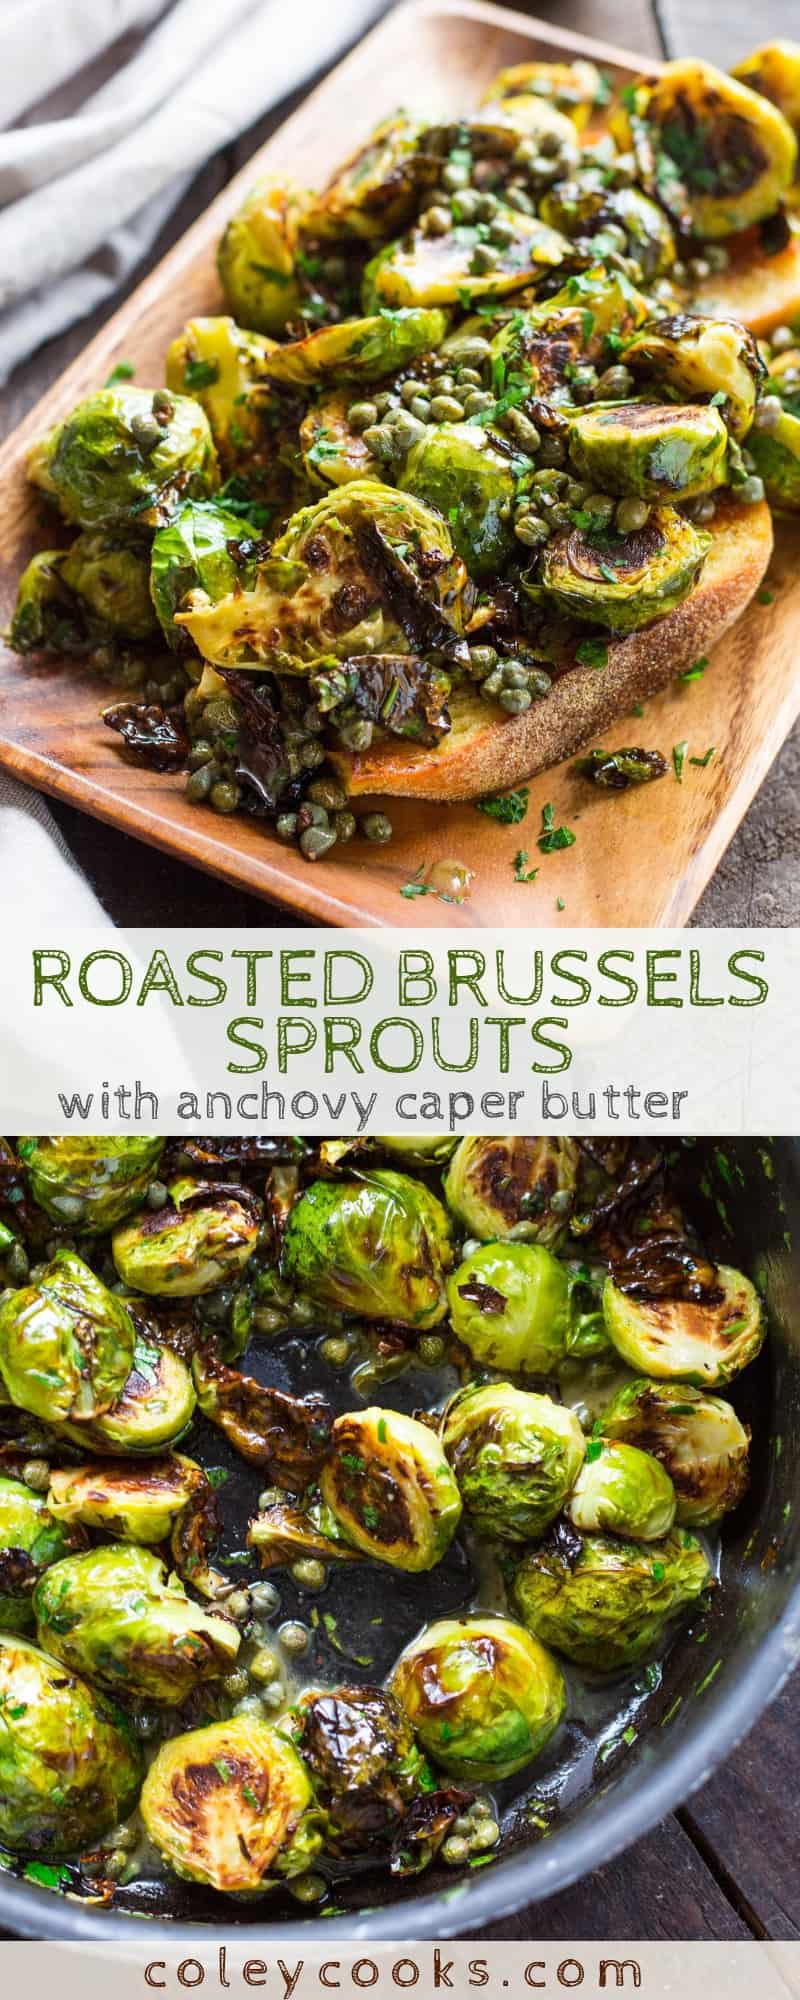 Roasted Brussels Sprouts with Anchovy Caper Butter | This easy and delicious roasted brussels sprout recipe is the best side dish ever! Great for Thanksgiving #roasted #brusselssprouts #anchovies #capers #side #thanksgiving #recipe | ColeyCooks.com